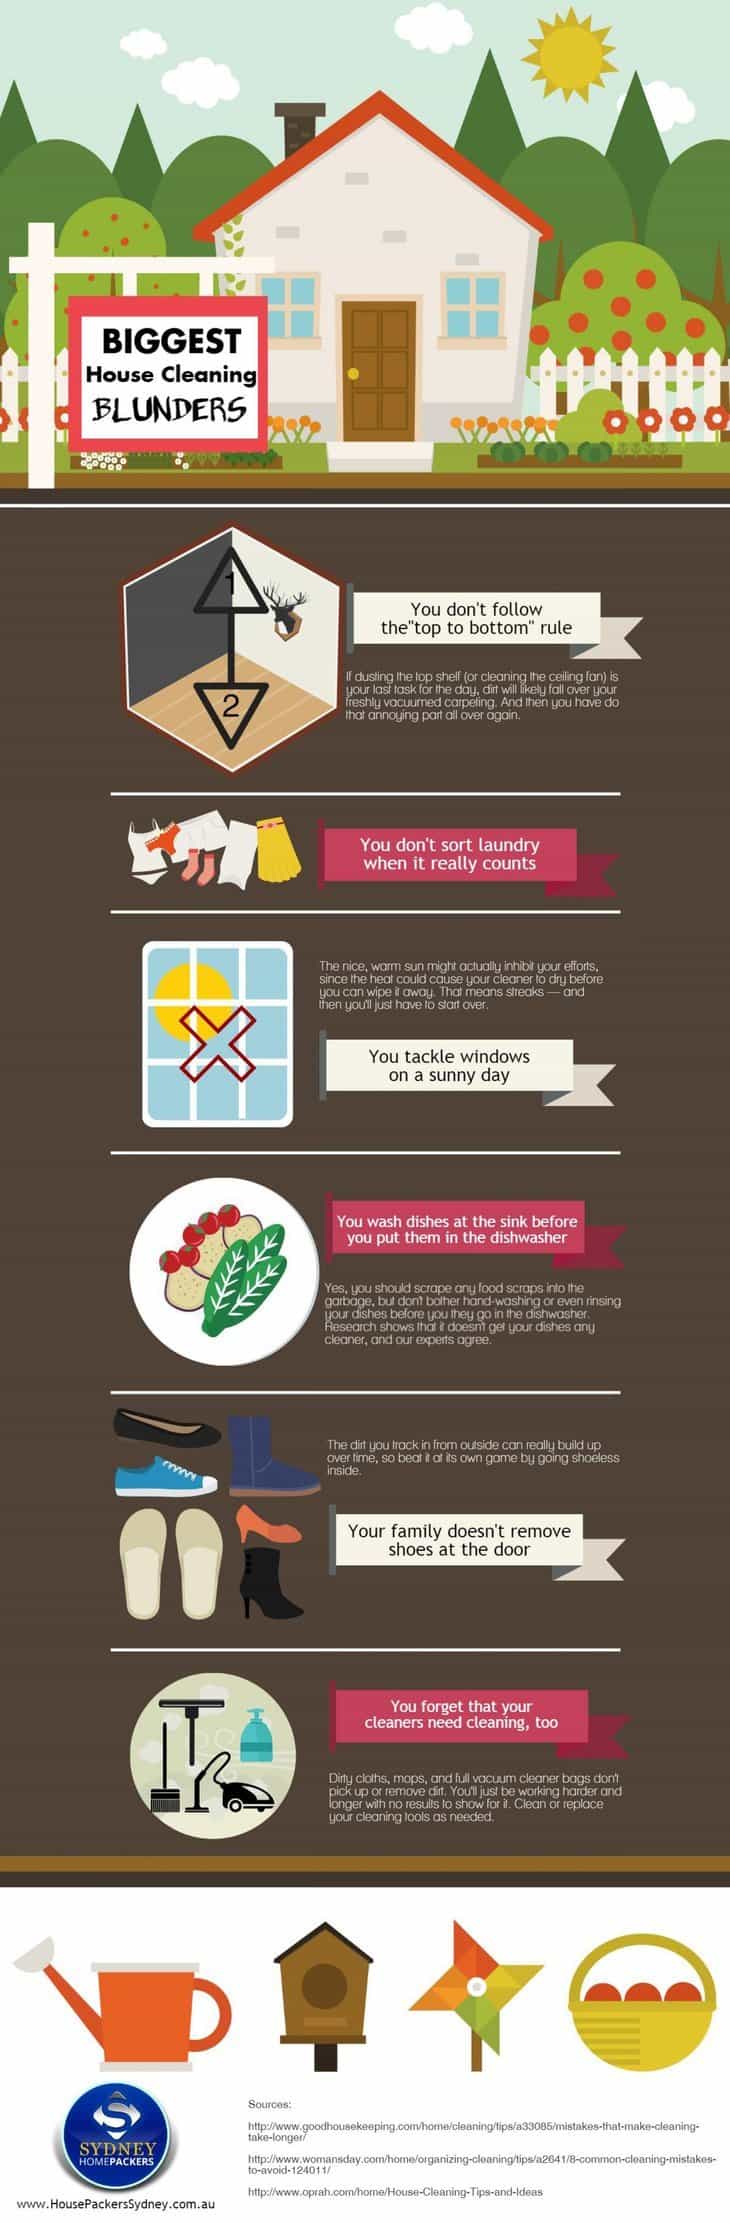 House Cleaning Tips - infographic